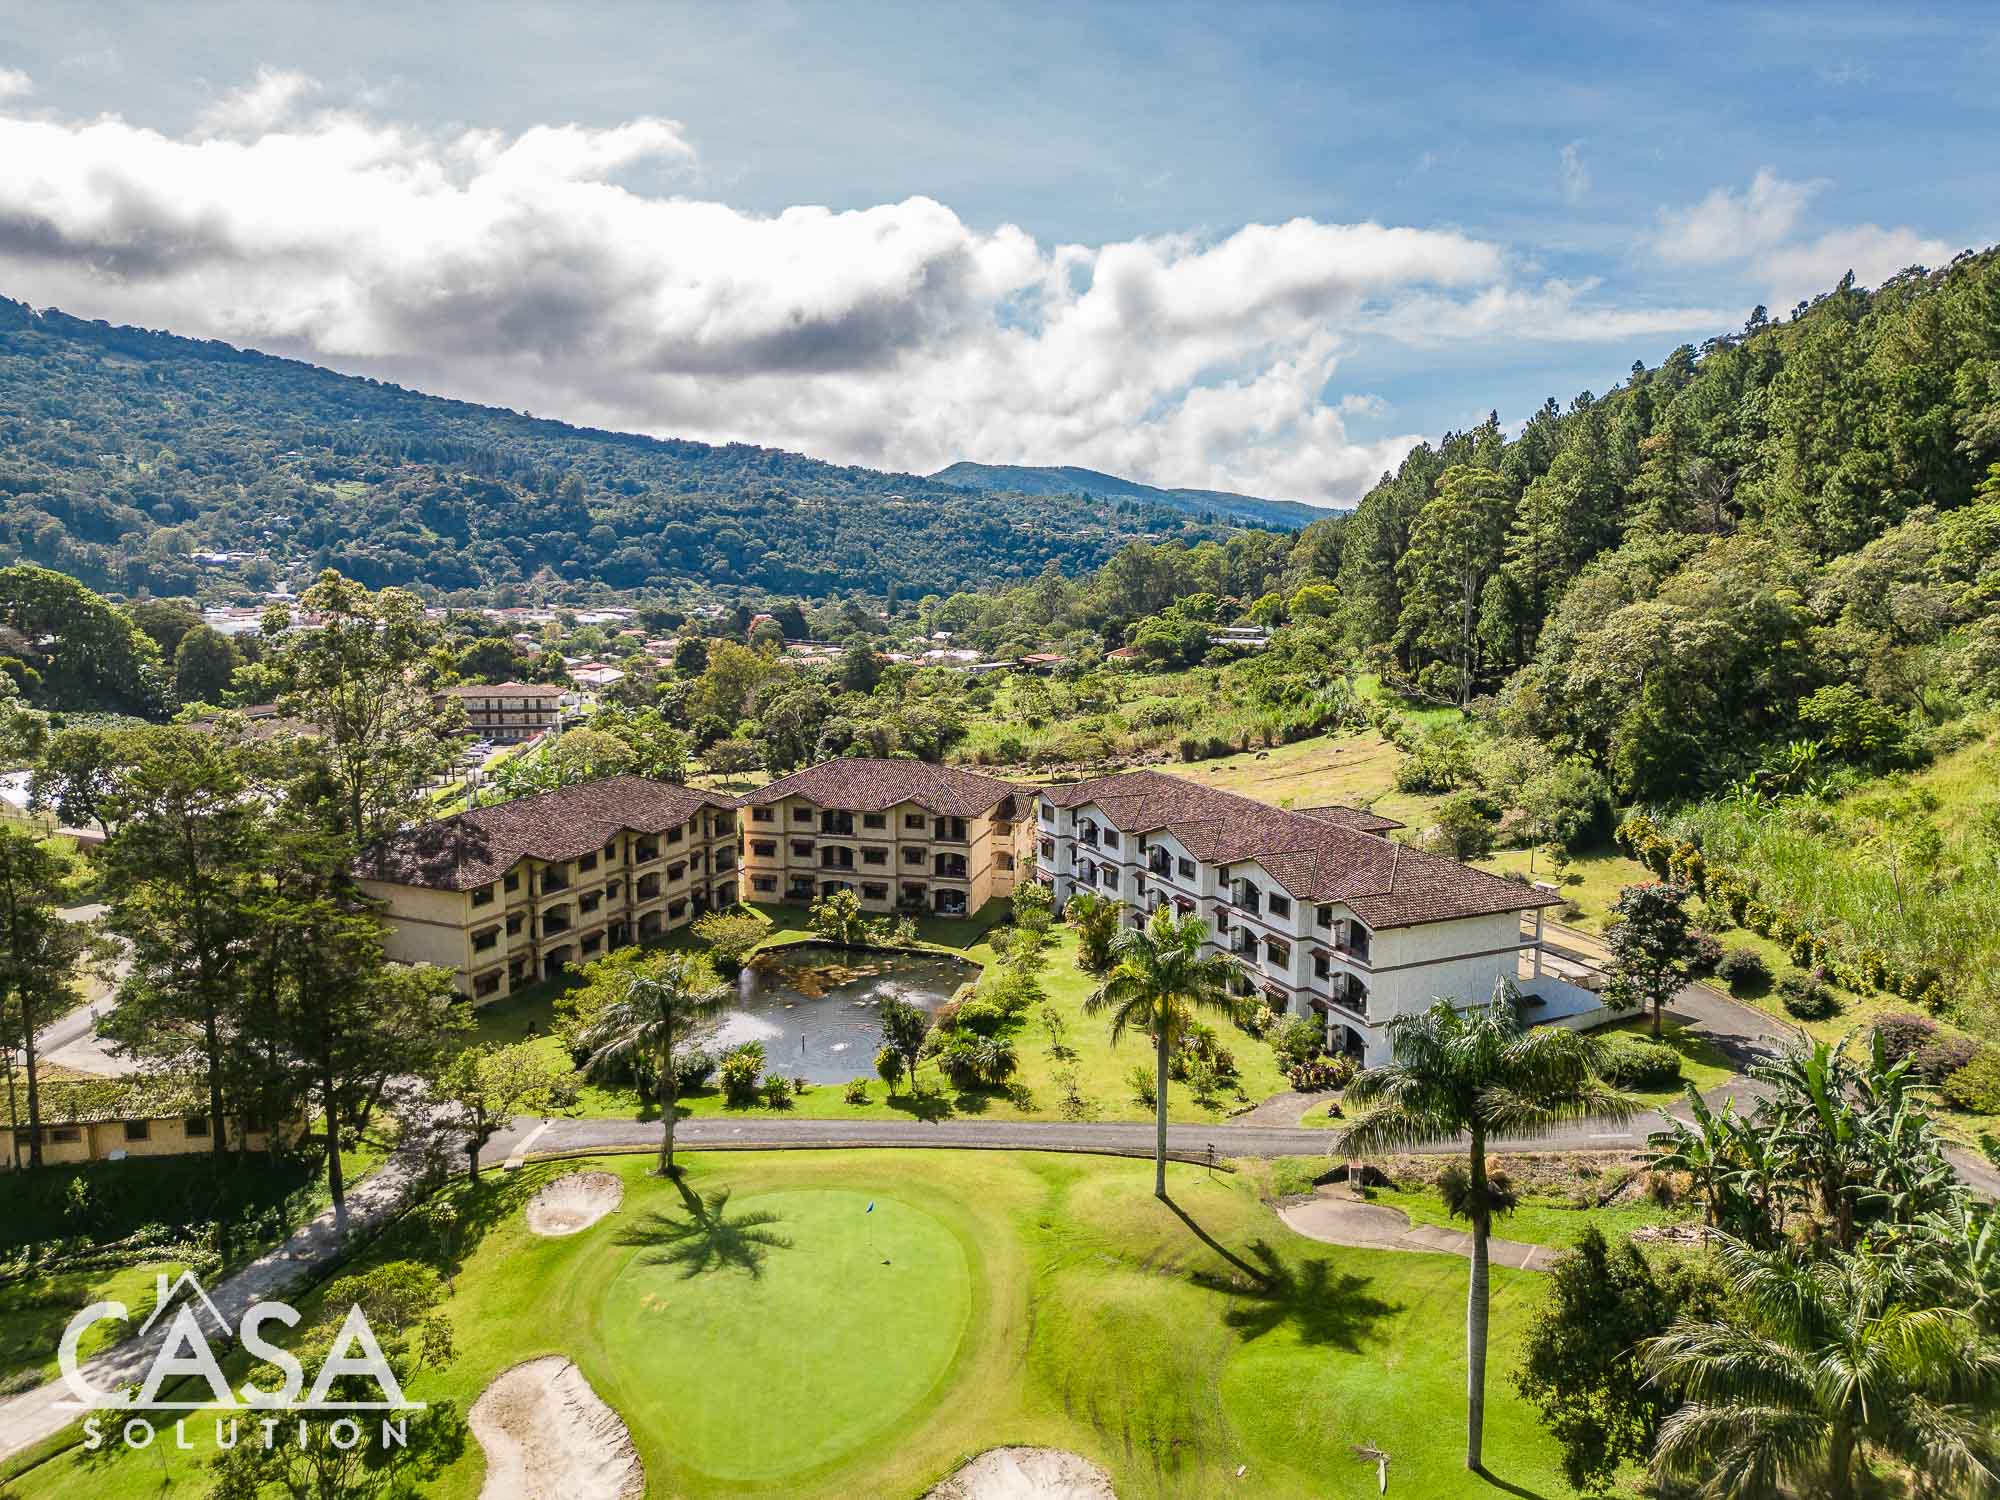 Sold by Casa Solution! Beautiful 3-Bedroom Condominium for Sale in Amenity-Rich Valle Escondido, Boquete, Panama – Furnished